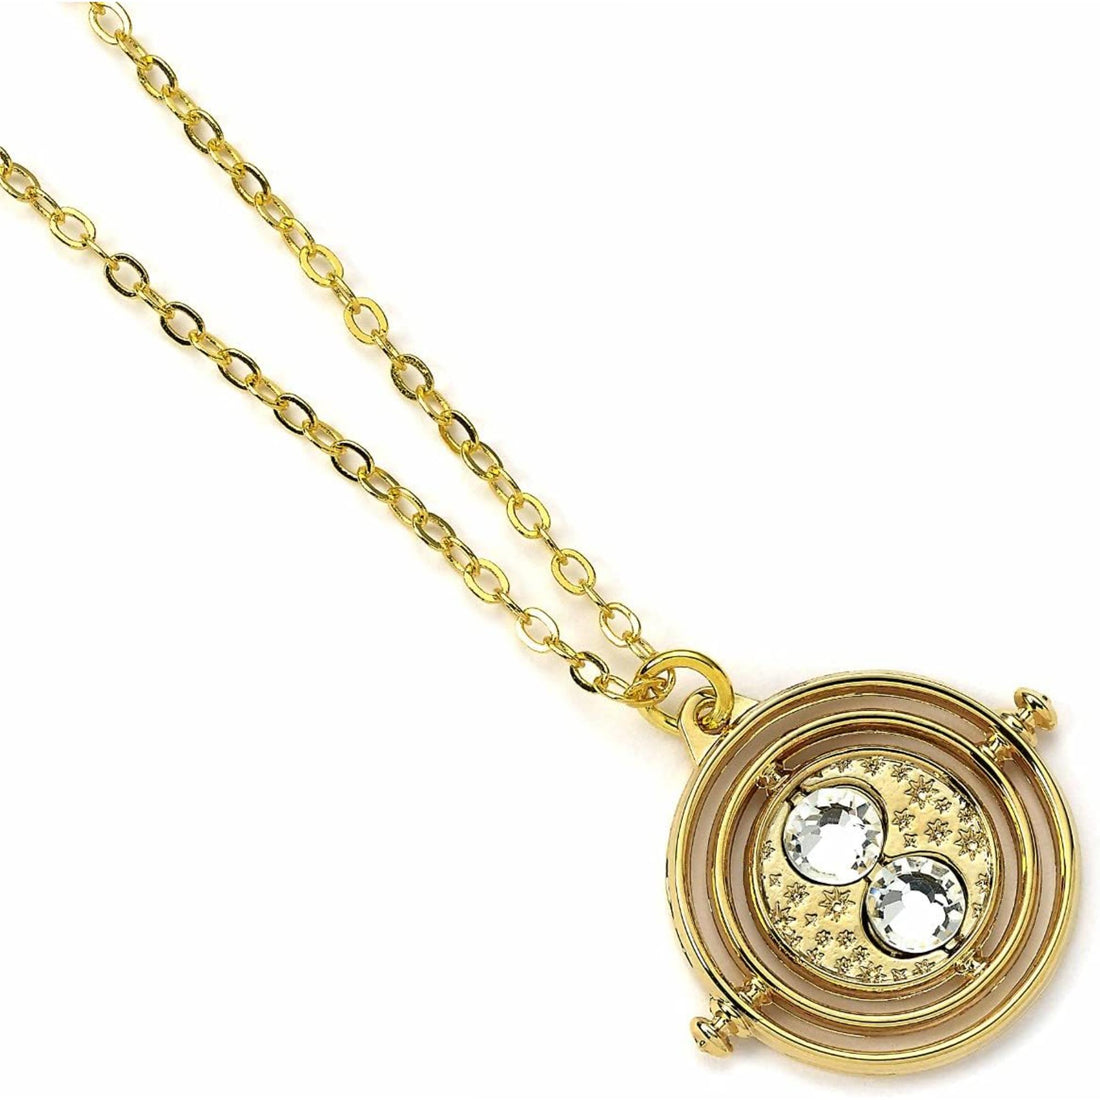 Necklace with Fixed Time Turner 20mm